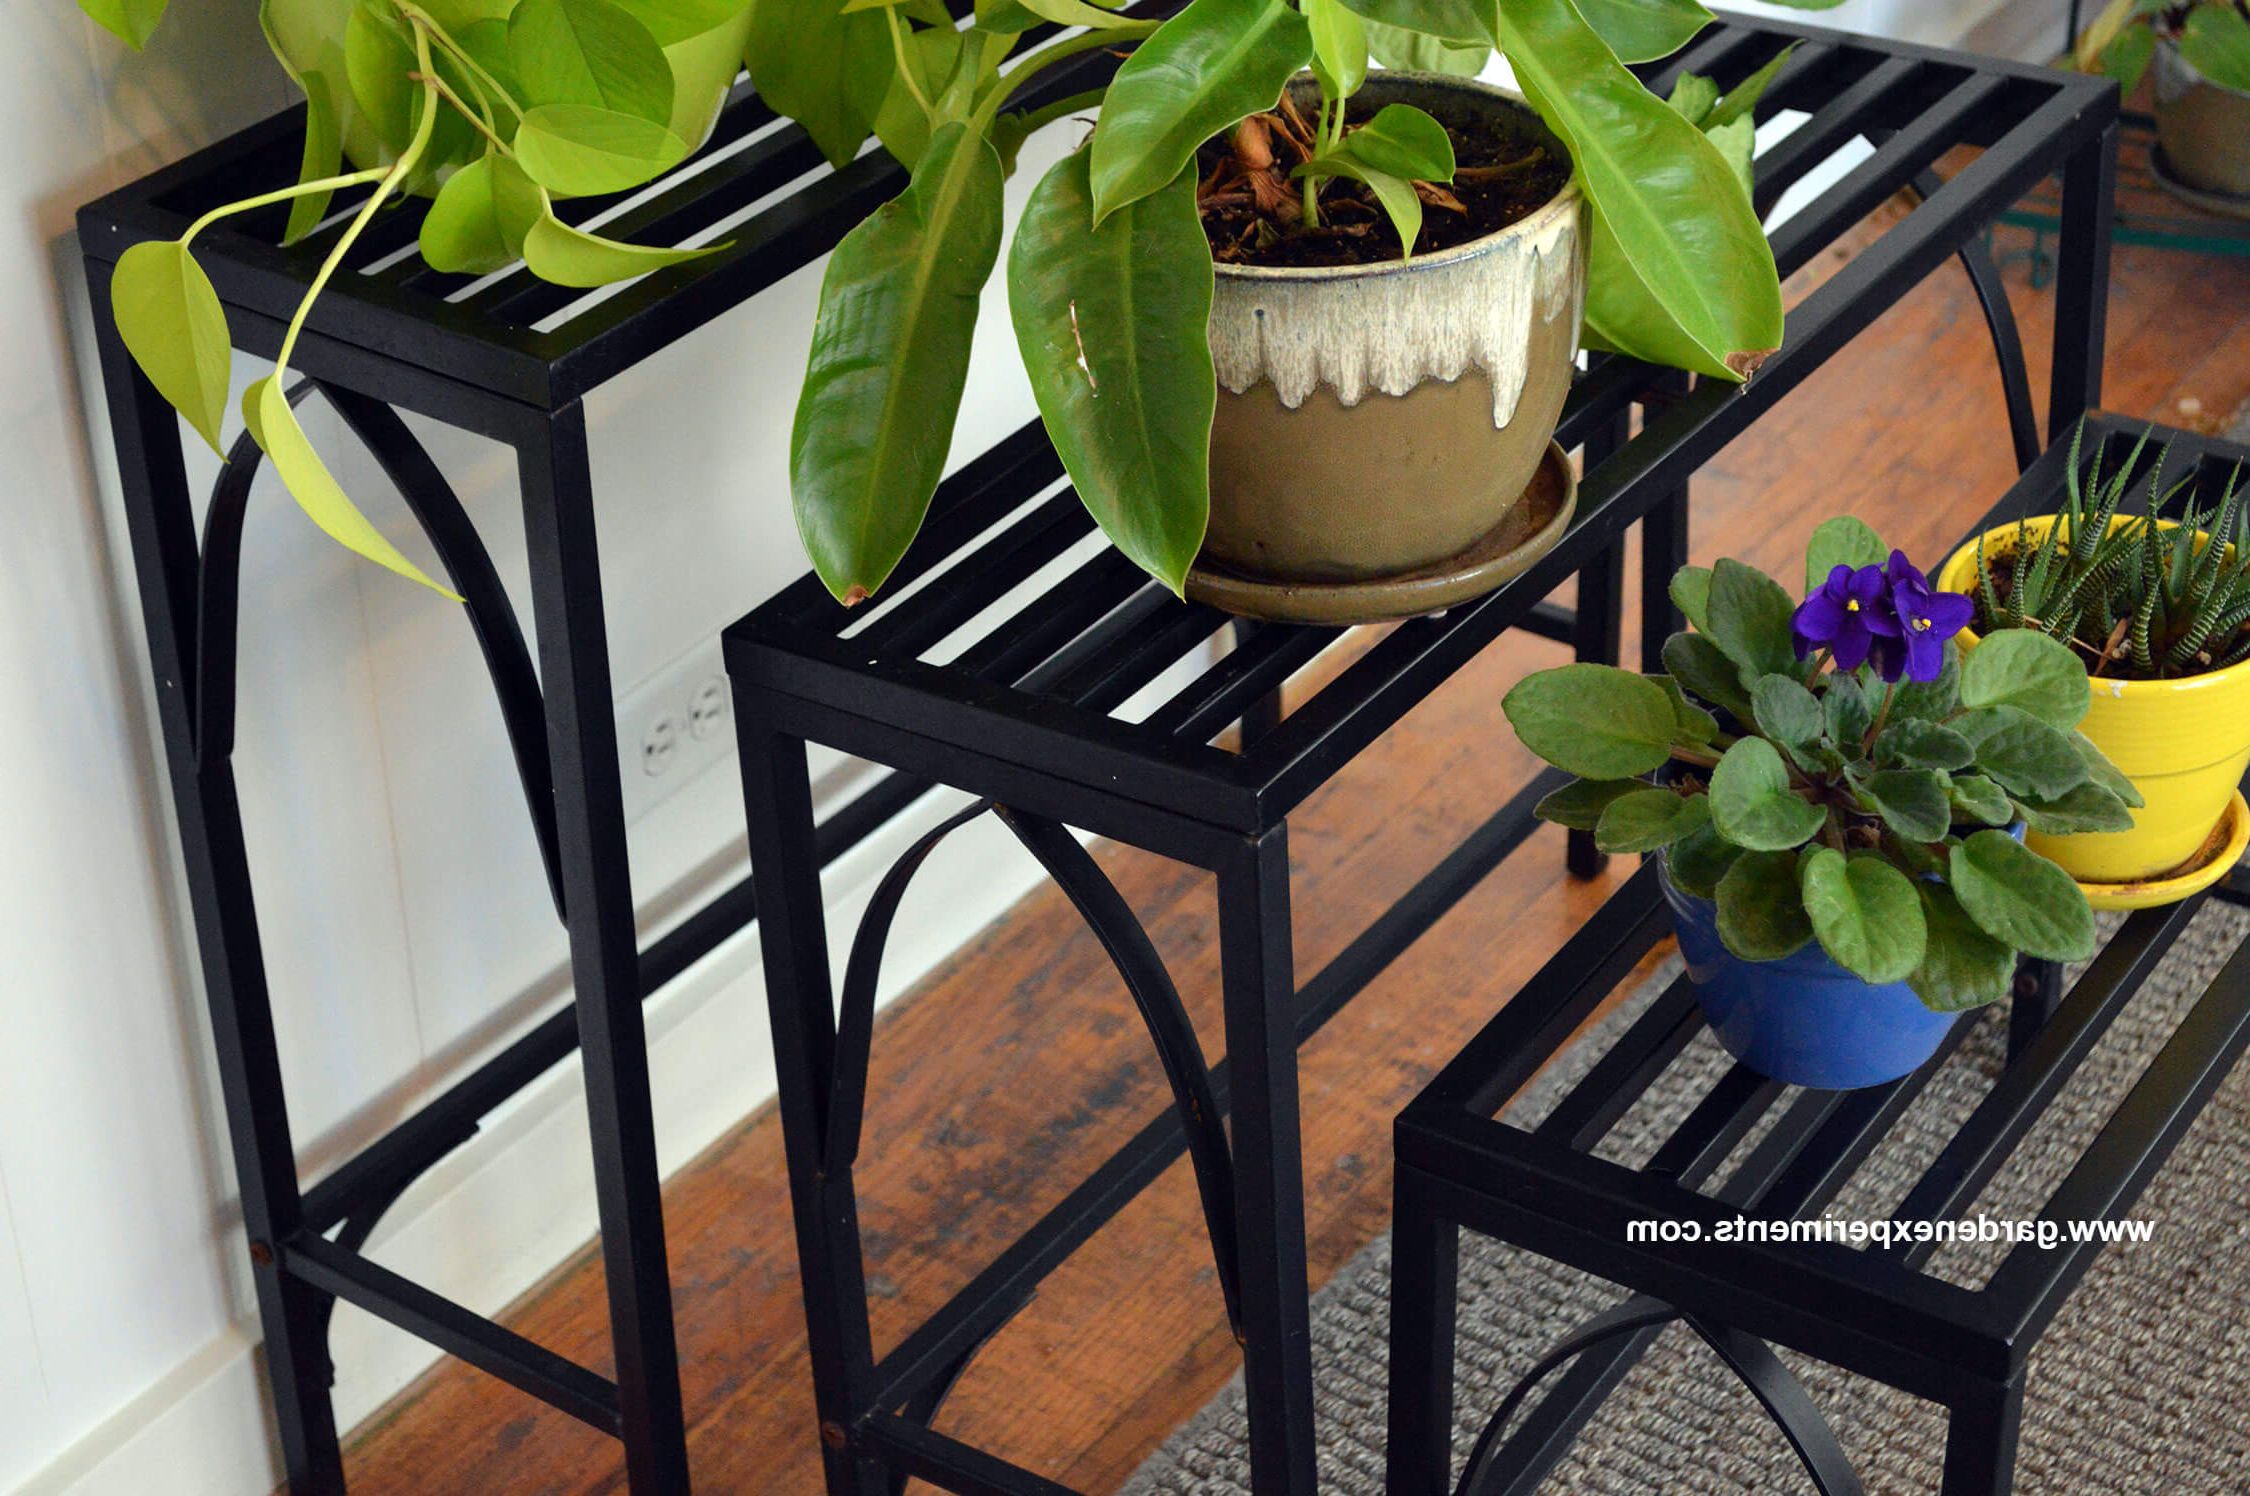 Metal Plant Stands Intended For Widely Used Sturdy Metal Plant Stand Holds 12 Plants (View 6 of 10)